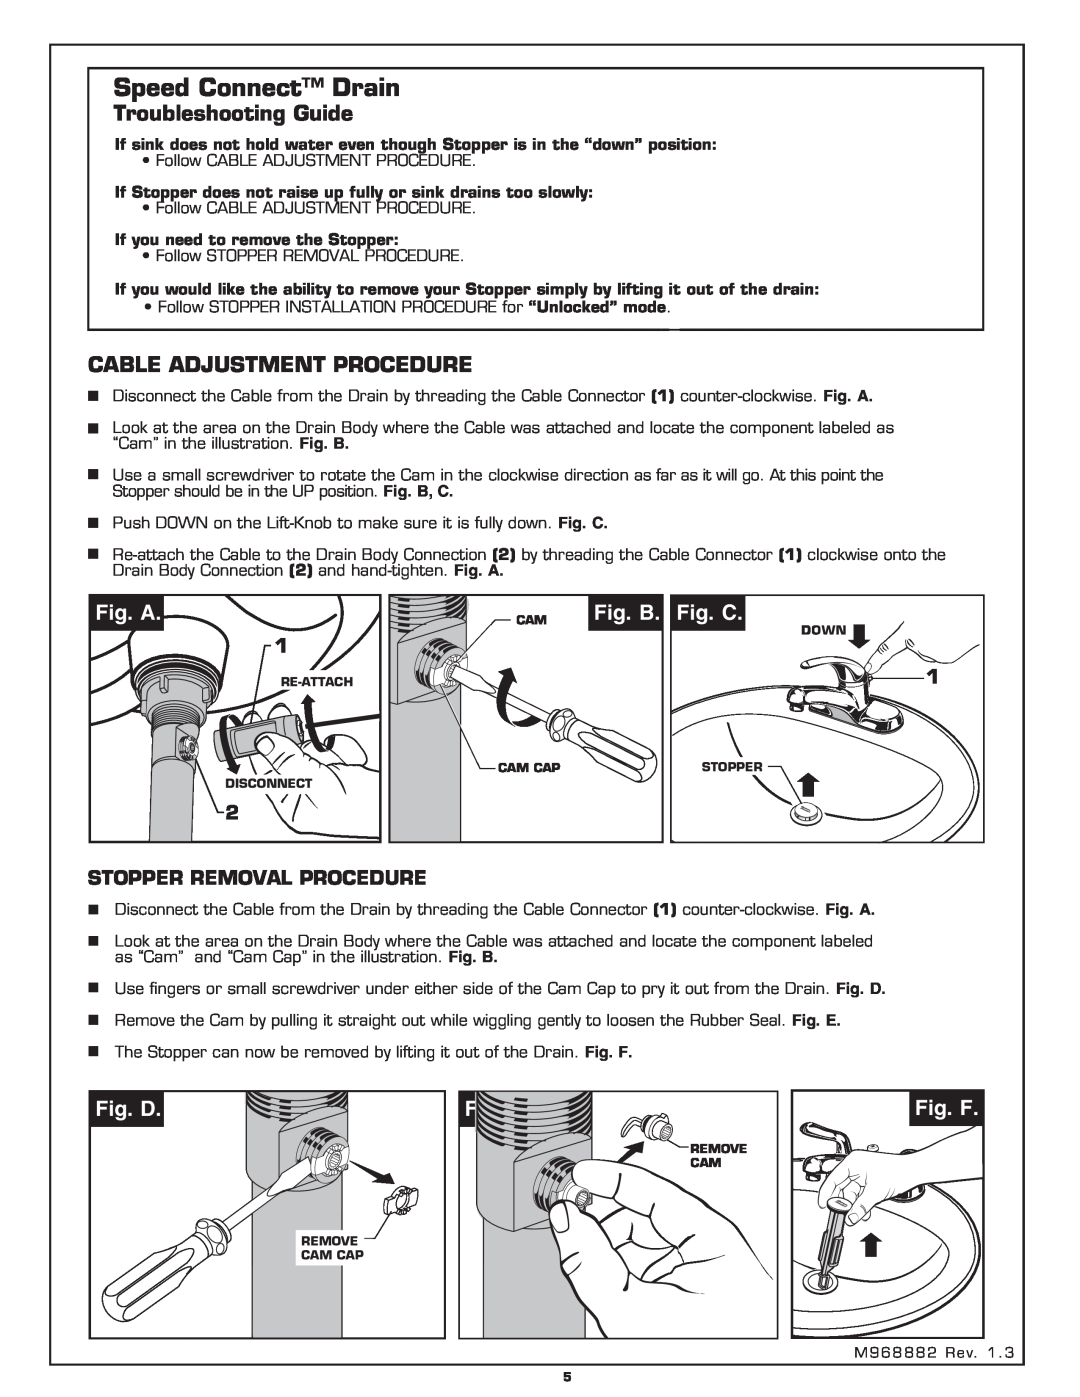 American Standard Single Control Lavatory Faucet with Speed Connect Drain Troubleshooting Guide, Fig. A, Fig. B, Fig. C 